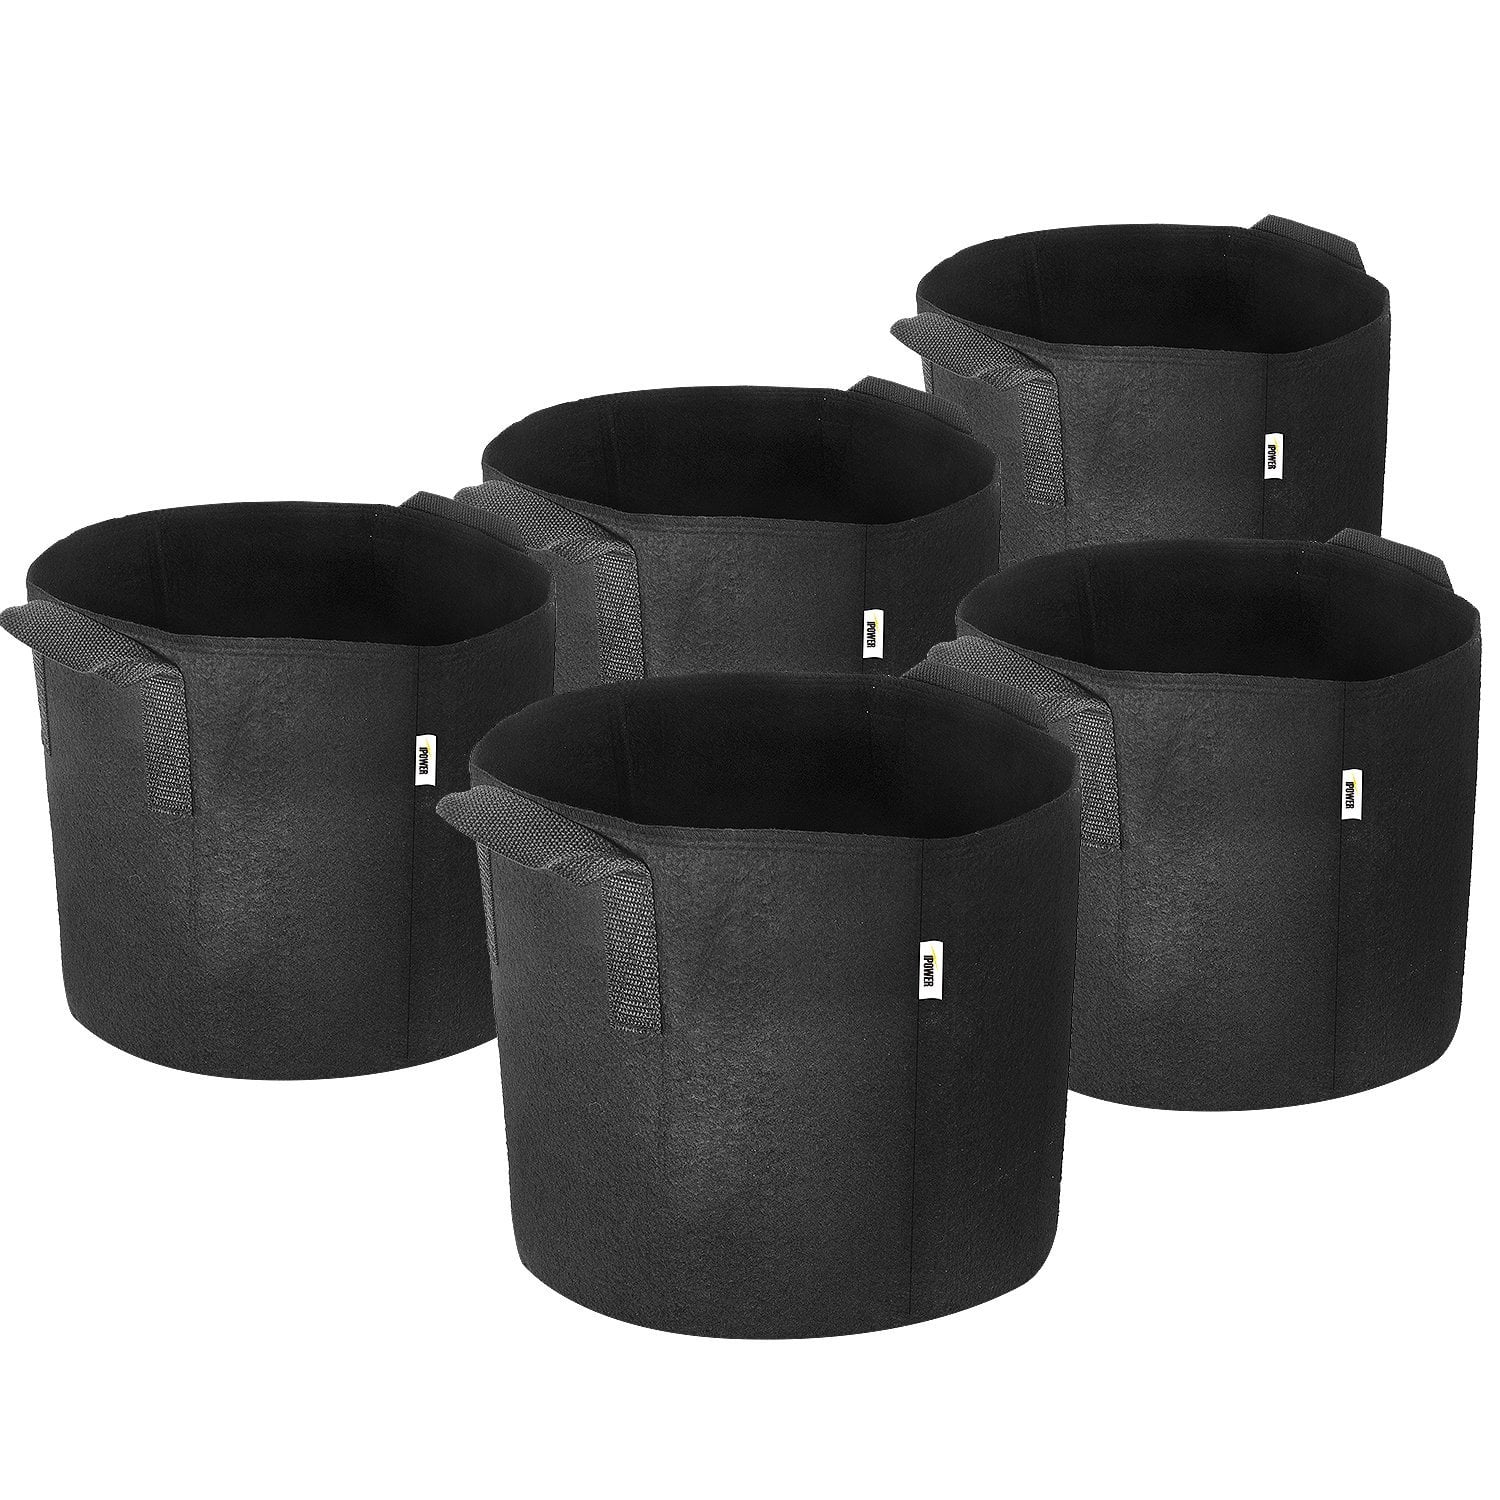 3 Gallon Growing Bags Felt Pots Root Pouch with Handles Planting Container 5pcs 